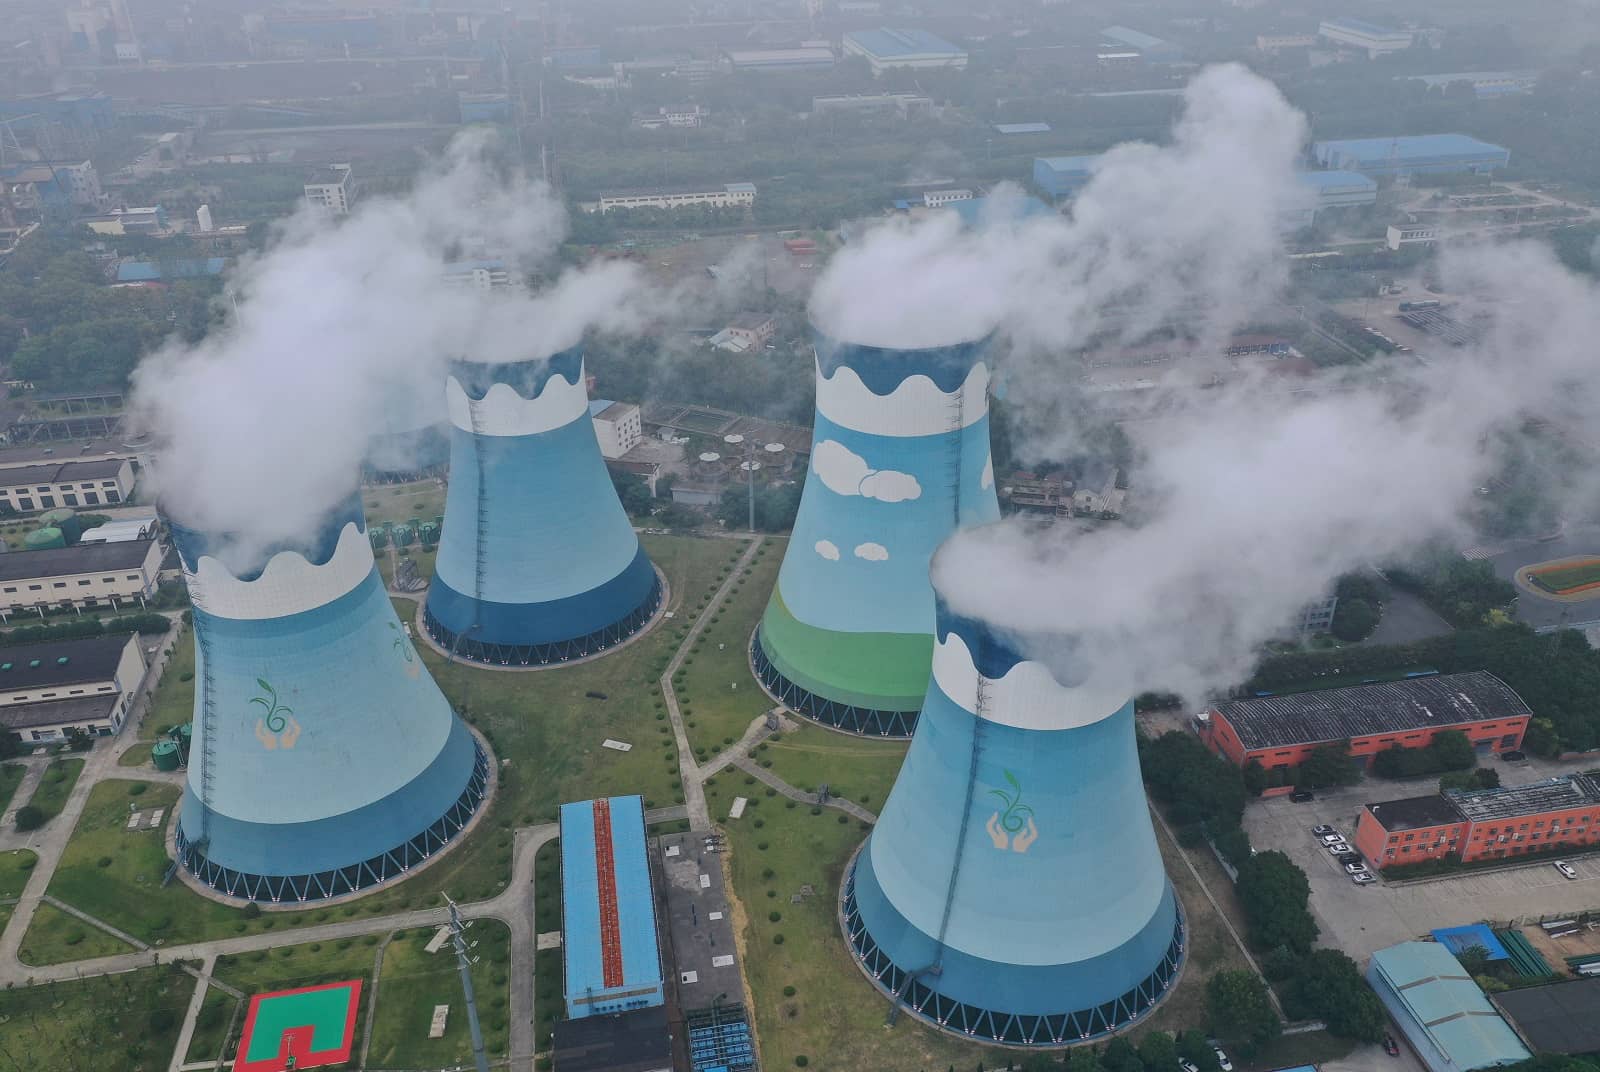 The story behind China’s power shortage ‘There’s still power, just don’t use it’